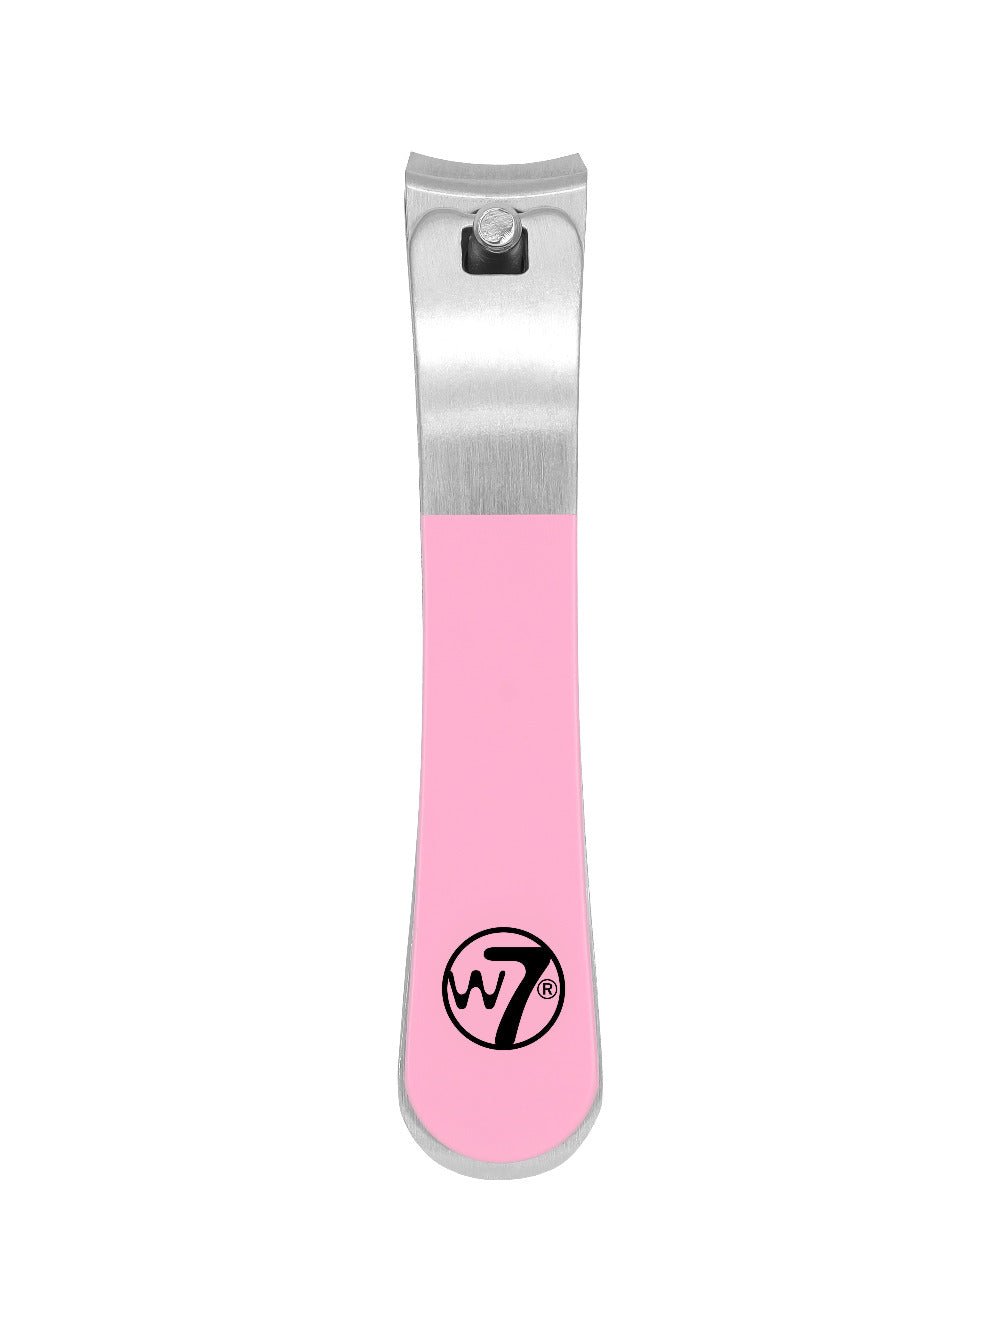 W7W7 Nail Clippers - Beauty Full Time